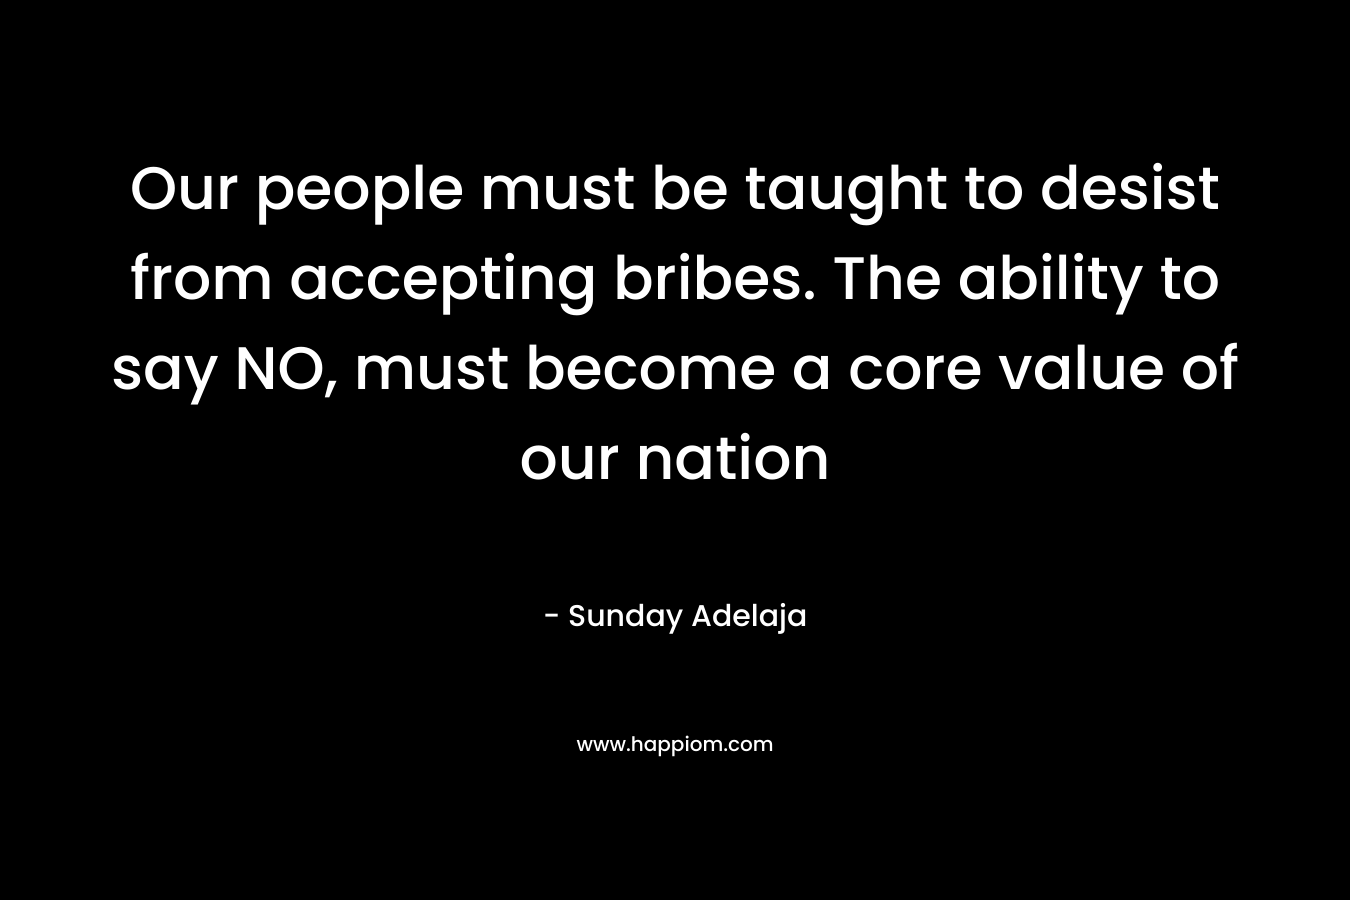 Our people must be taught to desist from accepting bribes. The ability to say NO, must become a core value of our nation